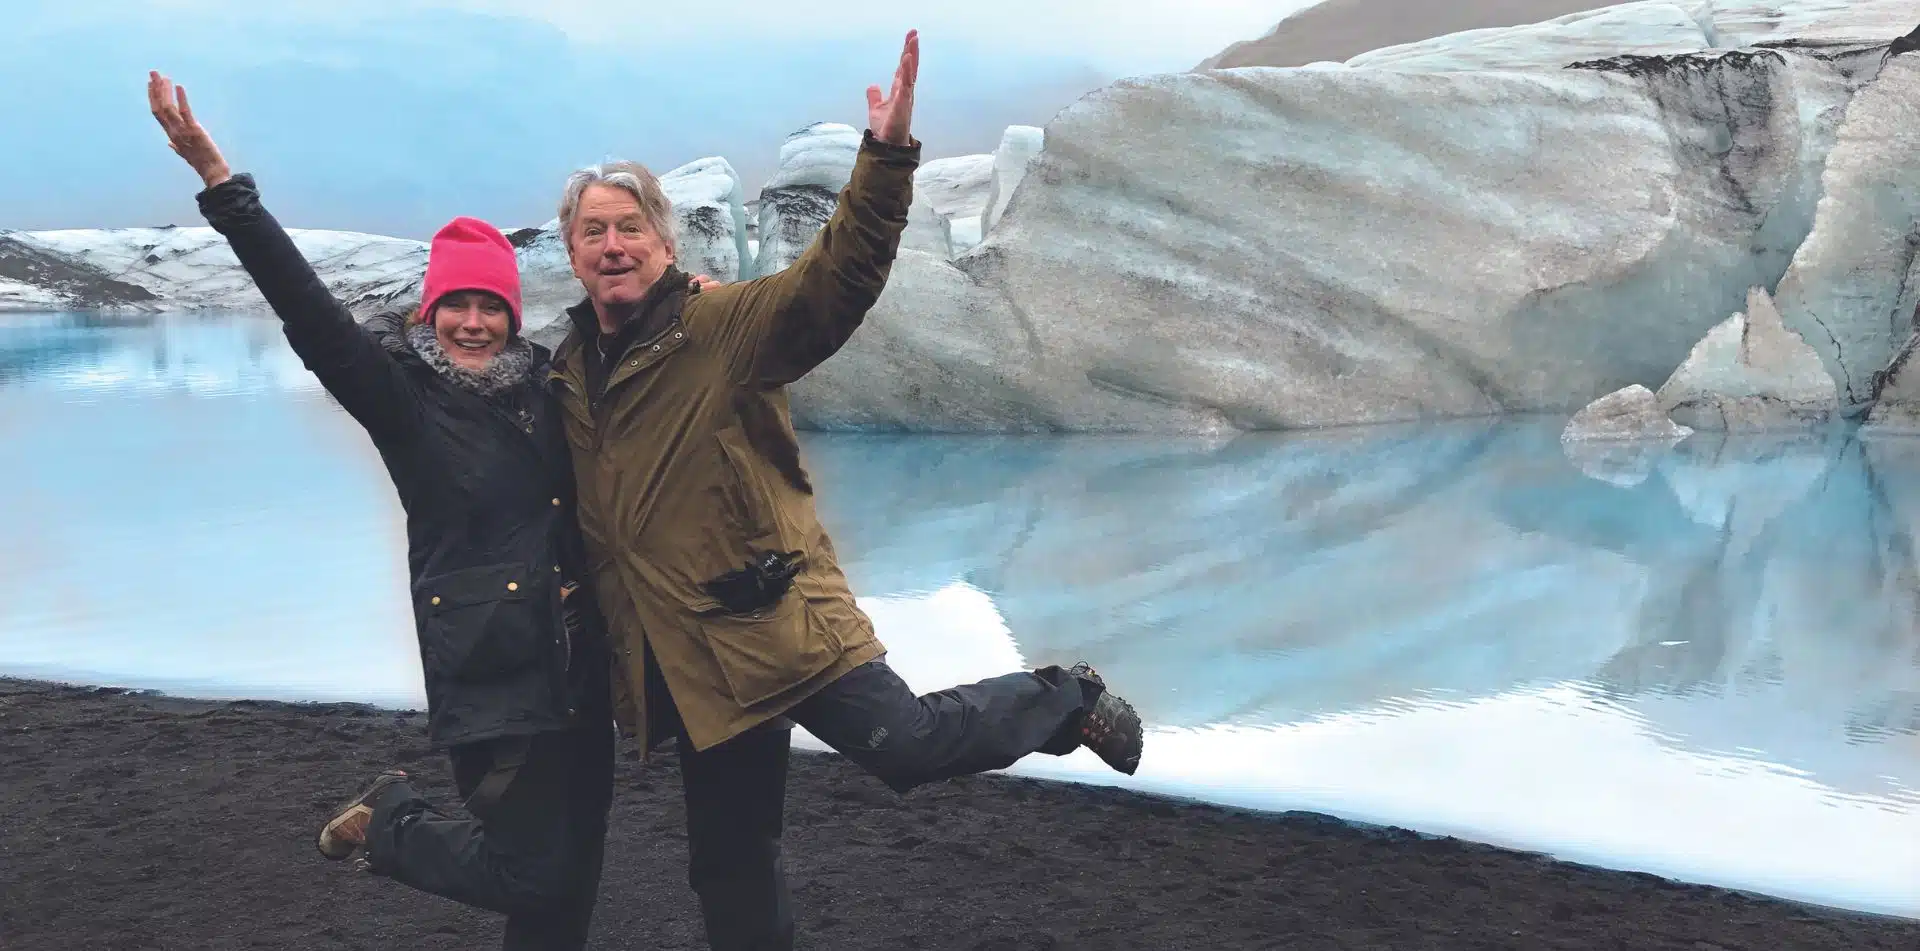 A couple enjoying their time in Iceland